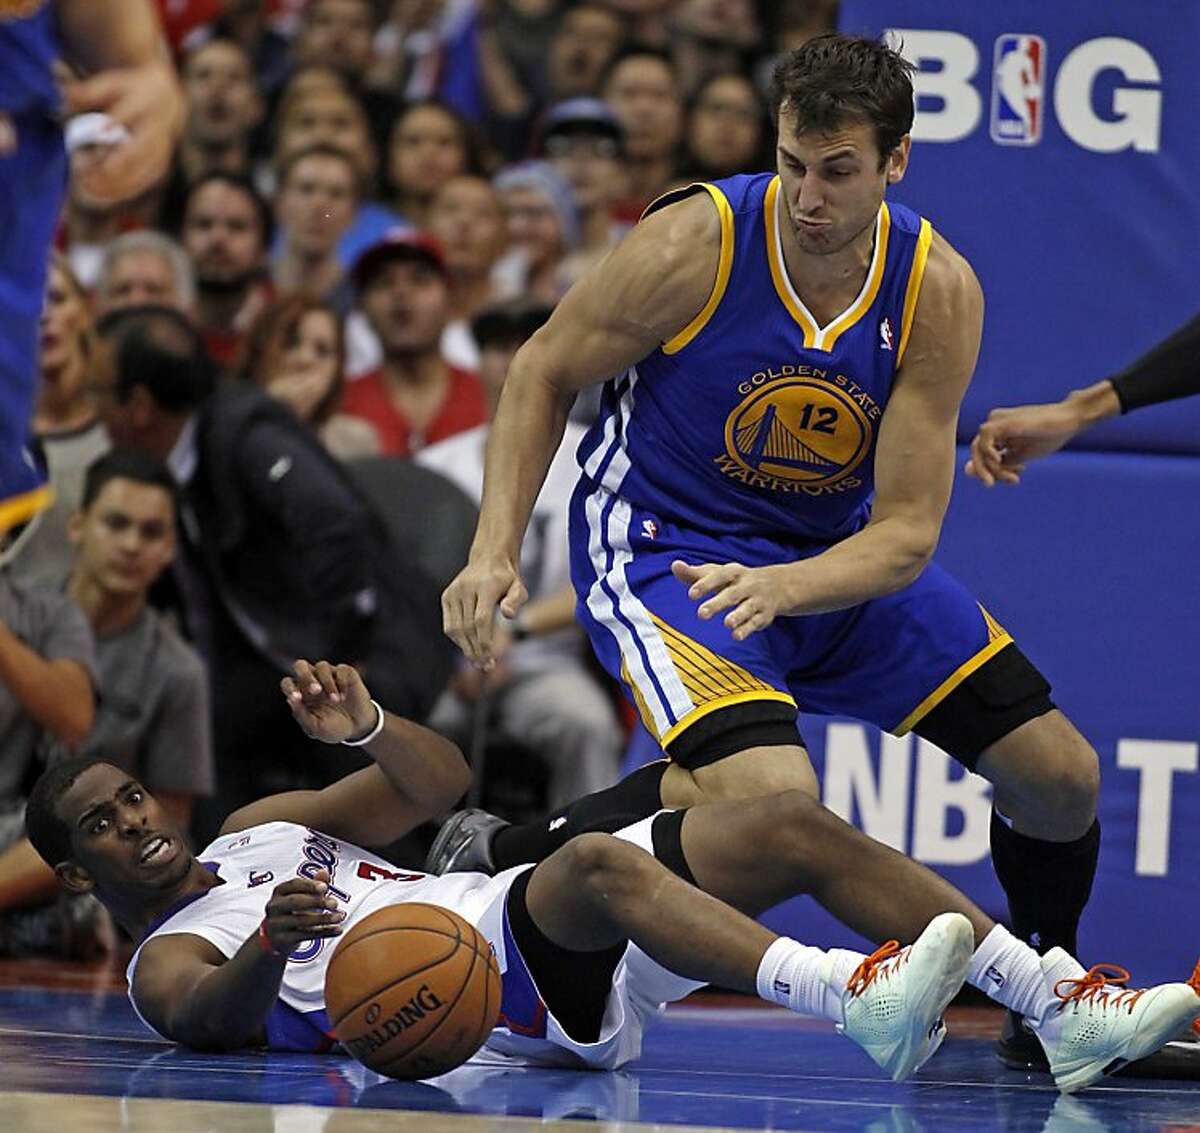 Los Angeles Clippers guard Chris Paul, left, battles Golden State Warriors center Andrew Bogut (12), of Australia, for the ball in the fourth quarter during an NBA basketball game on Thursday, Oct. 31, 2013, in Los Angeles. The Clippers won the game 126-115. (AP Photo/Alex Gallardo)